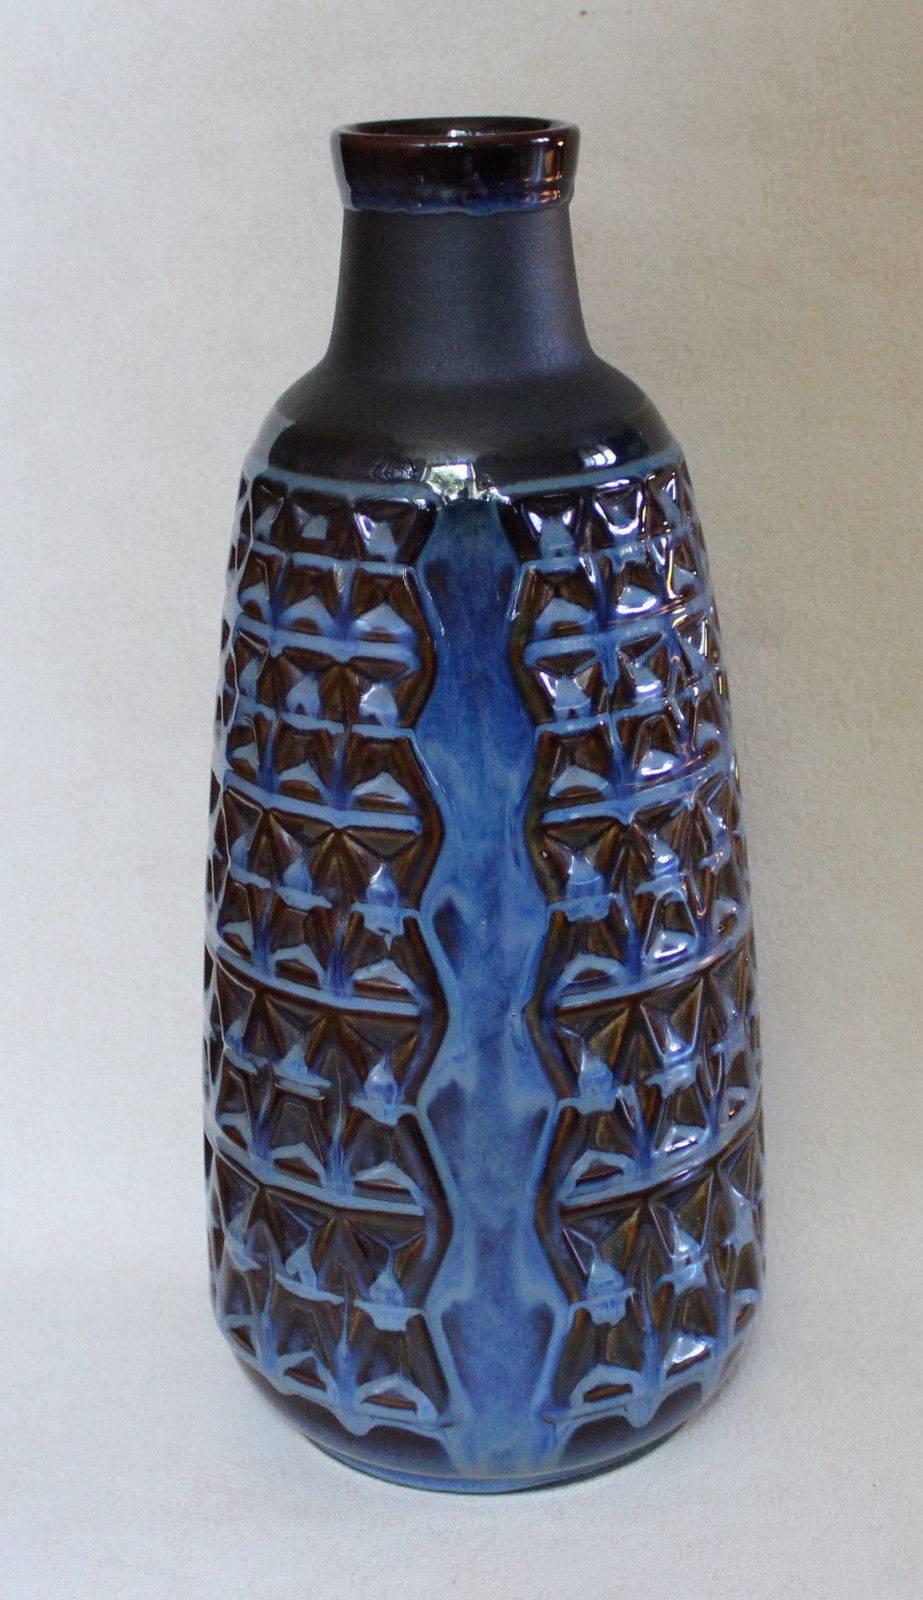 NOW SAVE 25% AND MORE

Søholm Denmark Stentøj· designed by Einar Johansen · from the 1960s. The rare and well-vase is very well preserved and has neither quirks, flakes, etc.

A wonderful tall and substantial Danish modern vintage ceramic vase